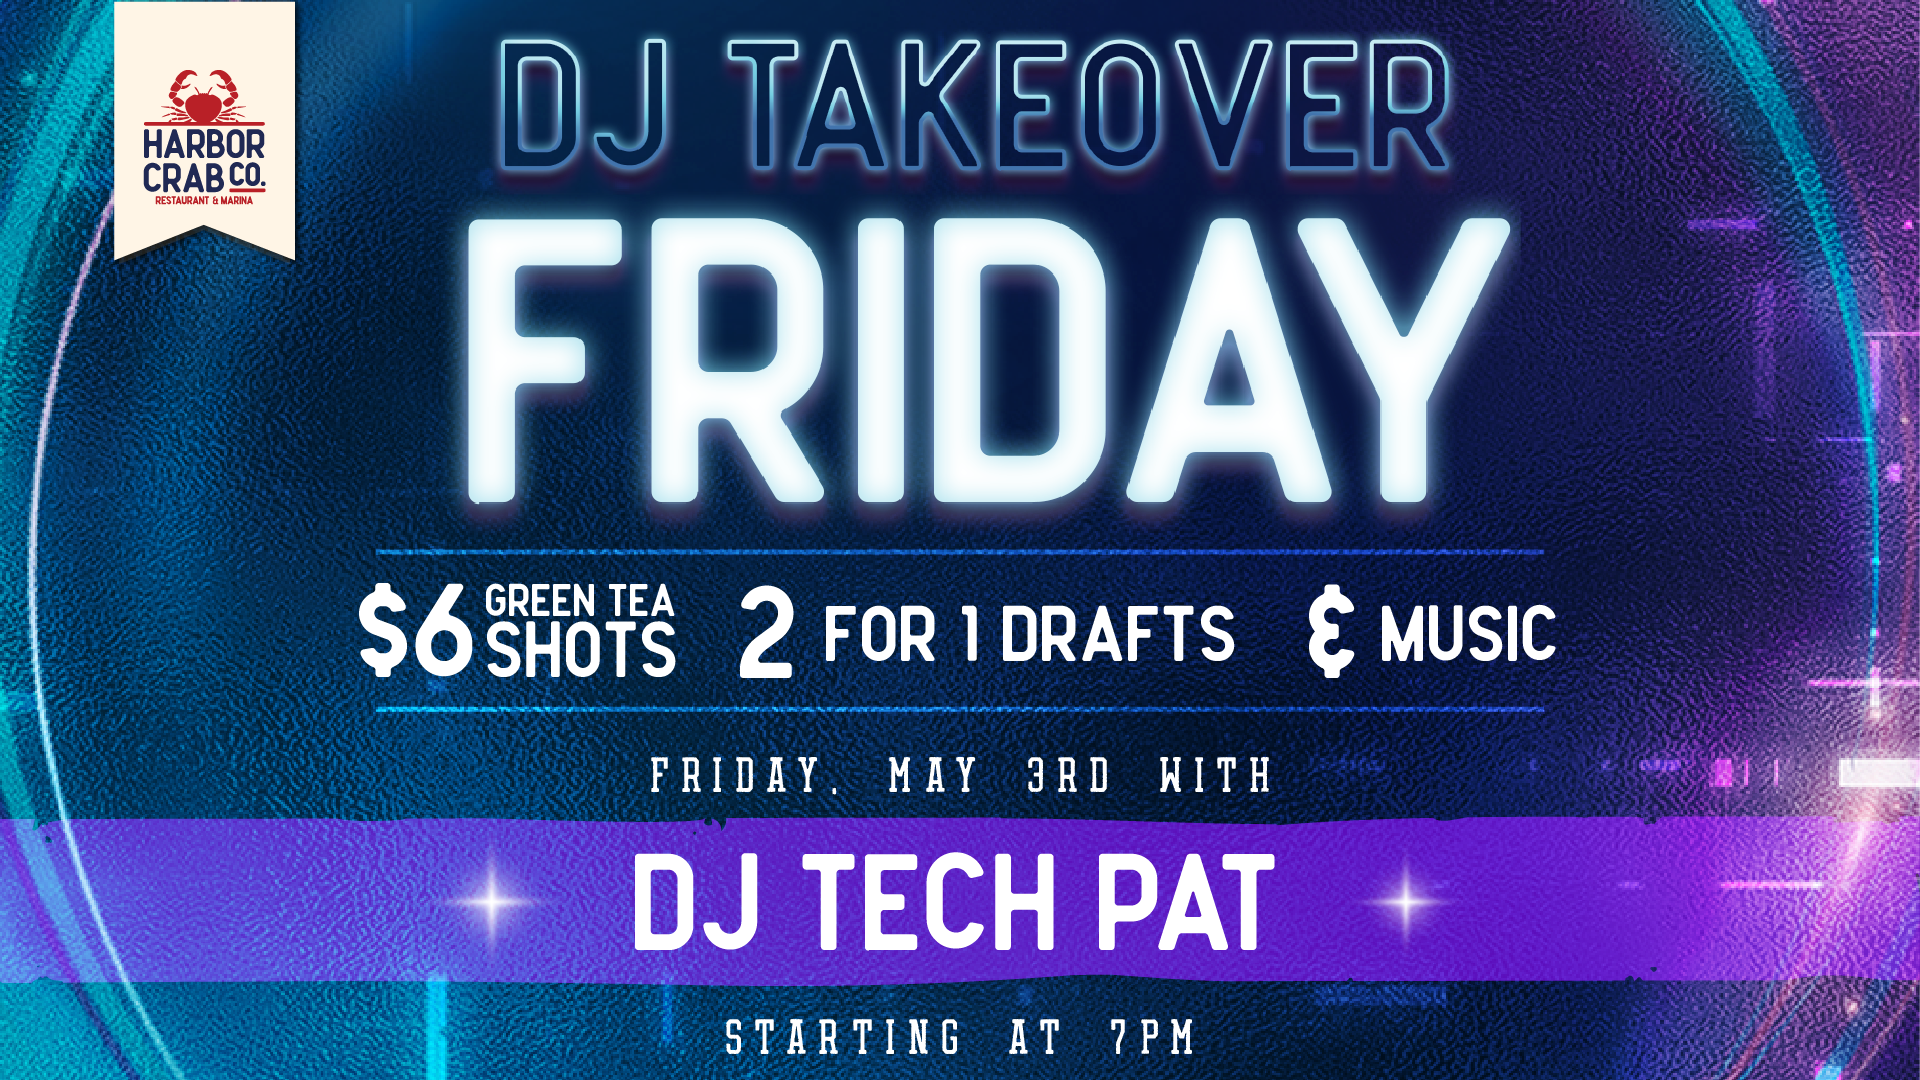 DJ Takeover with DJ Tech Pat at Harbor Crab on May 3rd, from 7 pm. Enjoy $6 green tea shots and 2-for-1 drafts.